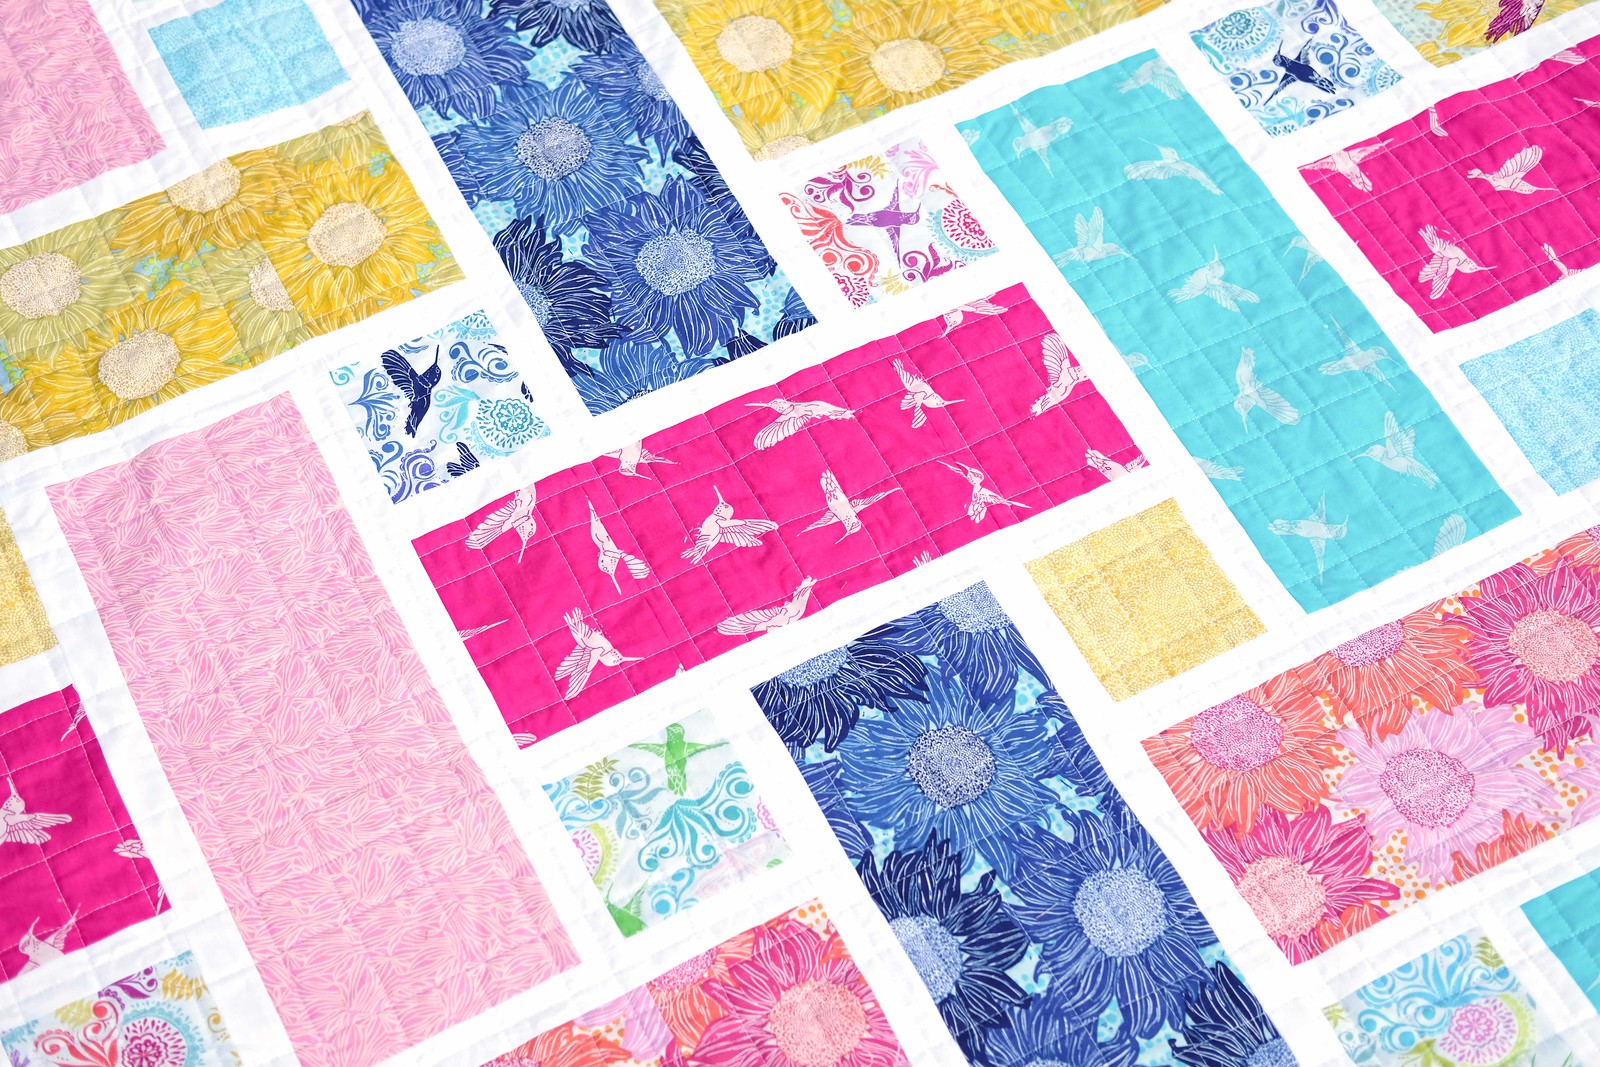 Murmur Quilt - The Tessa Quilt Pattern by Kitchen Table Quilting